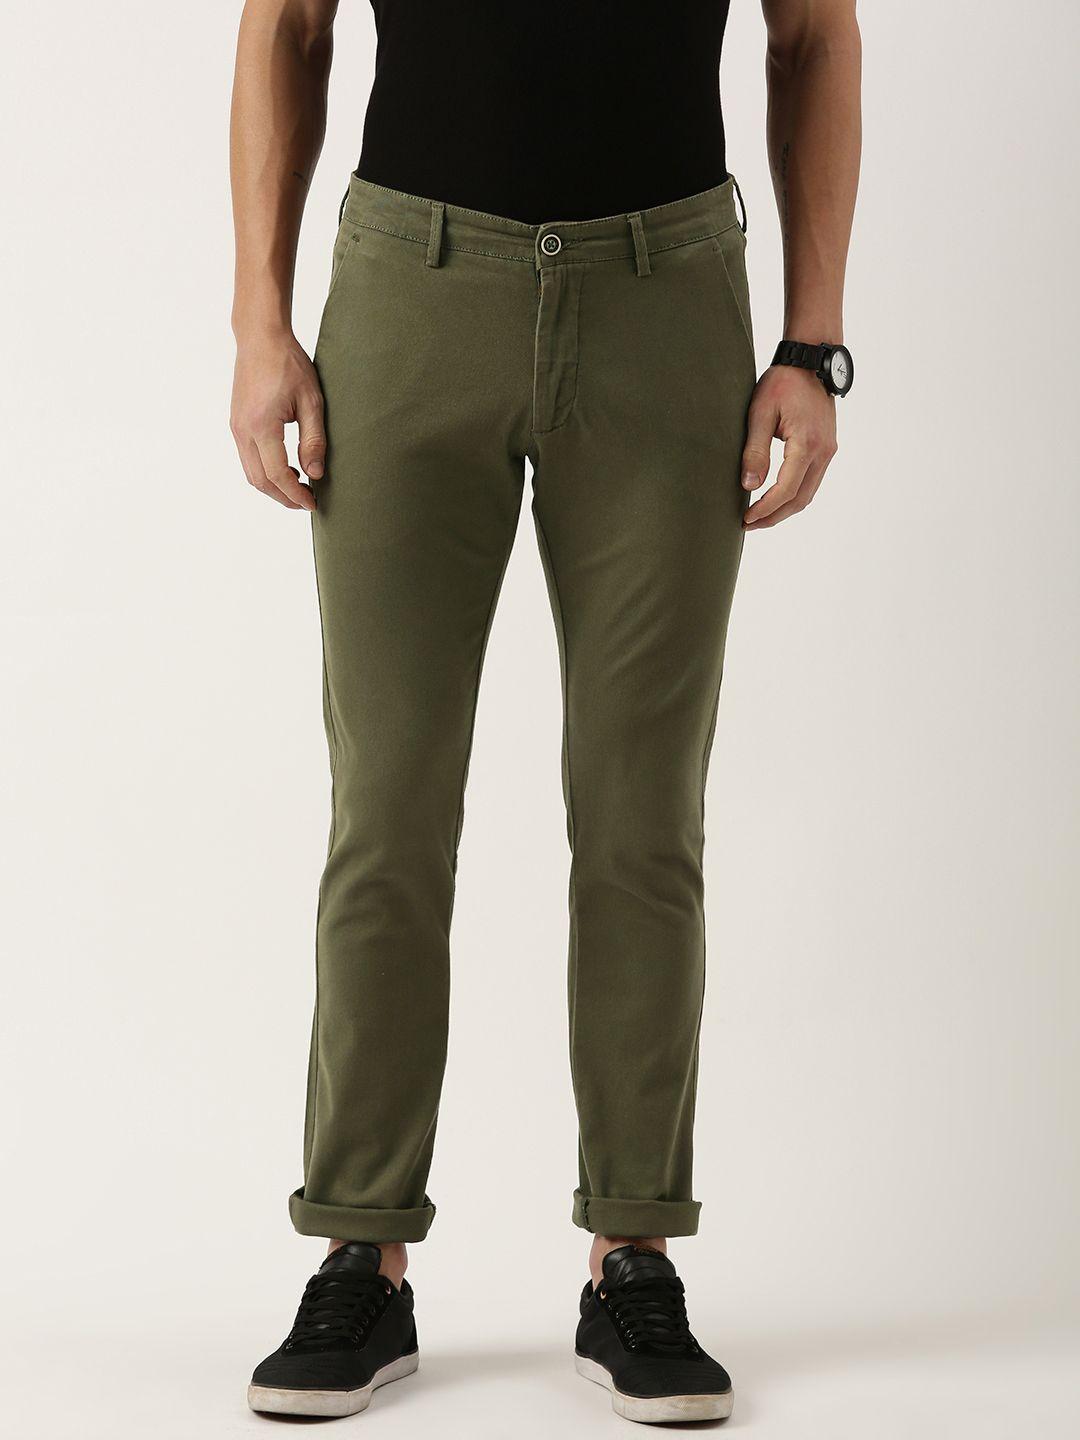 peter england men slim fit chinos trousers